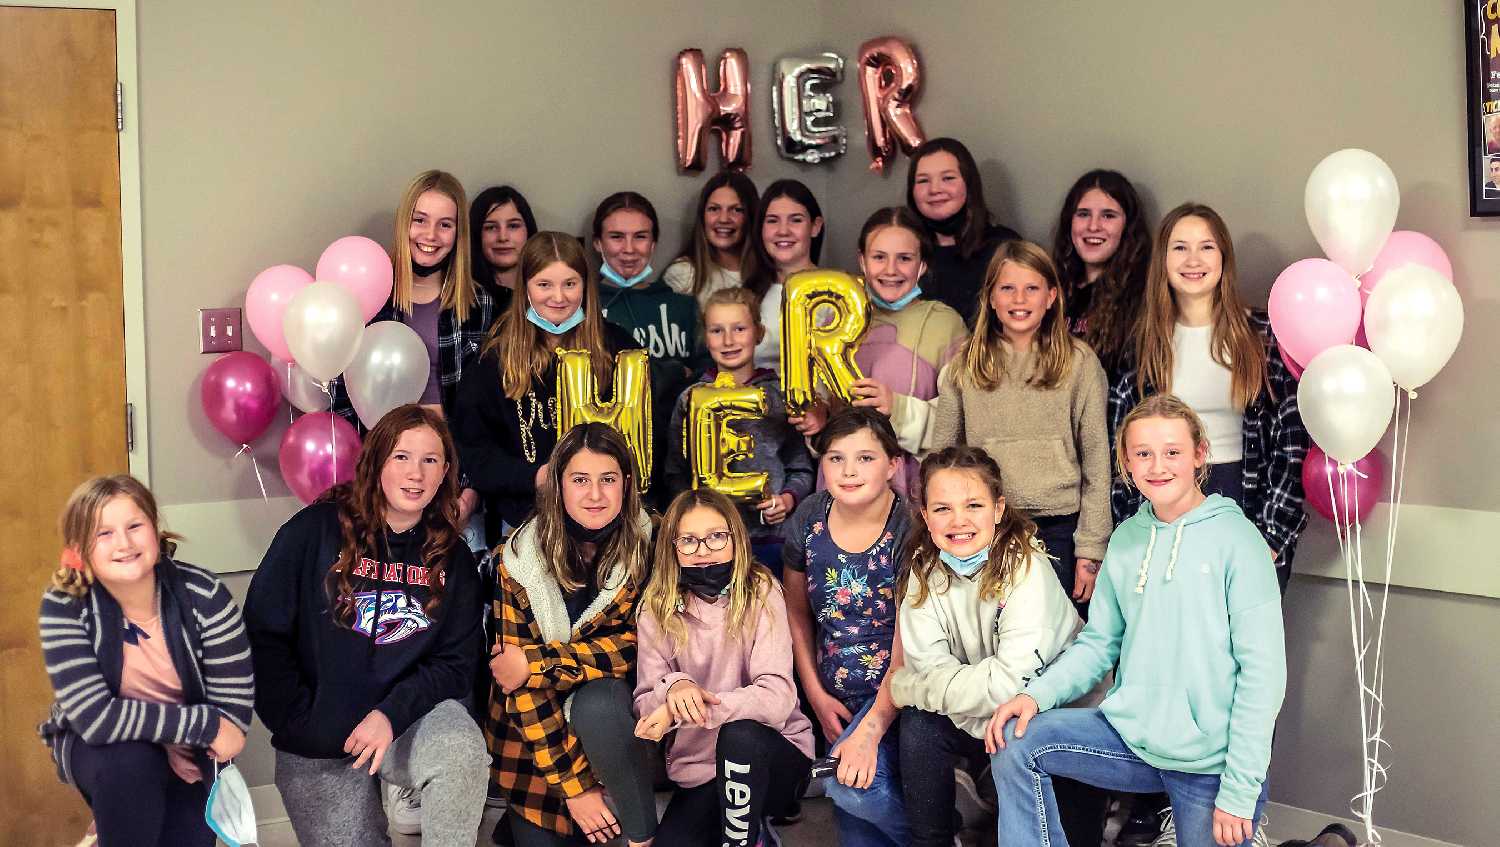 In celebration of the HER Girl Club’s one year anniversary, the girls who are a part of the organization celebrated its success in October.  